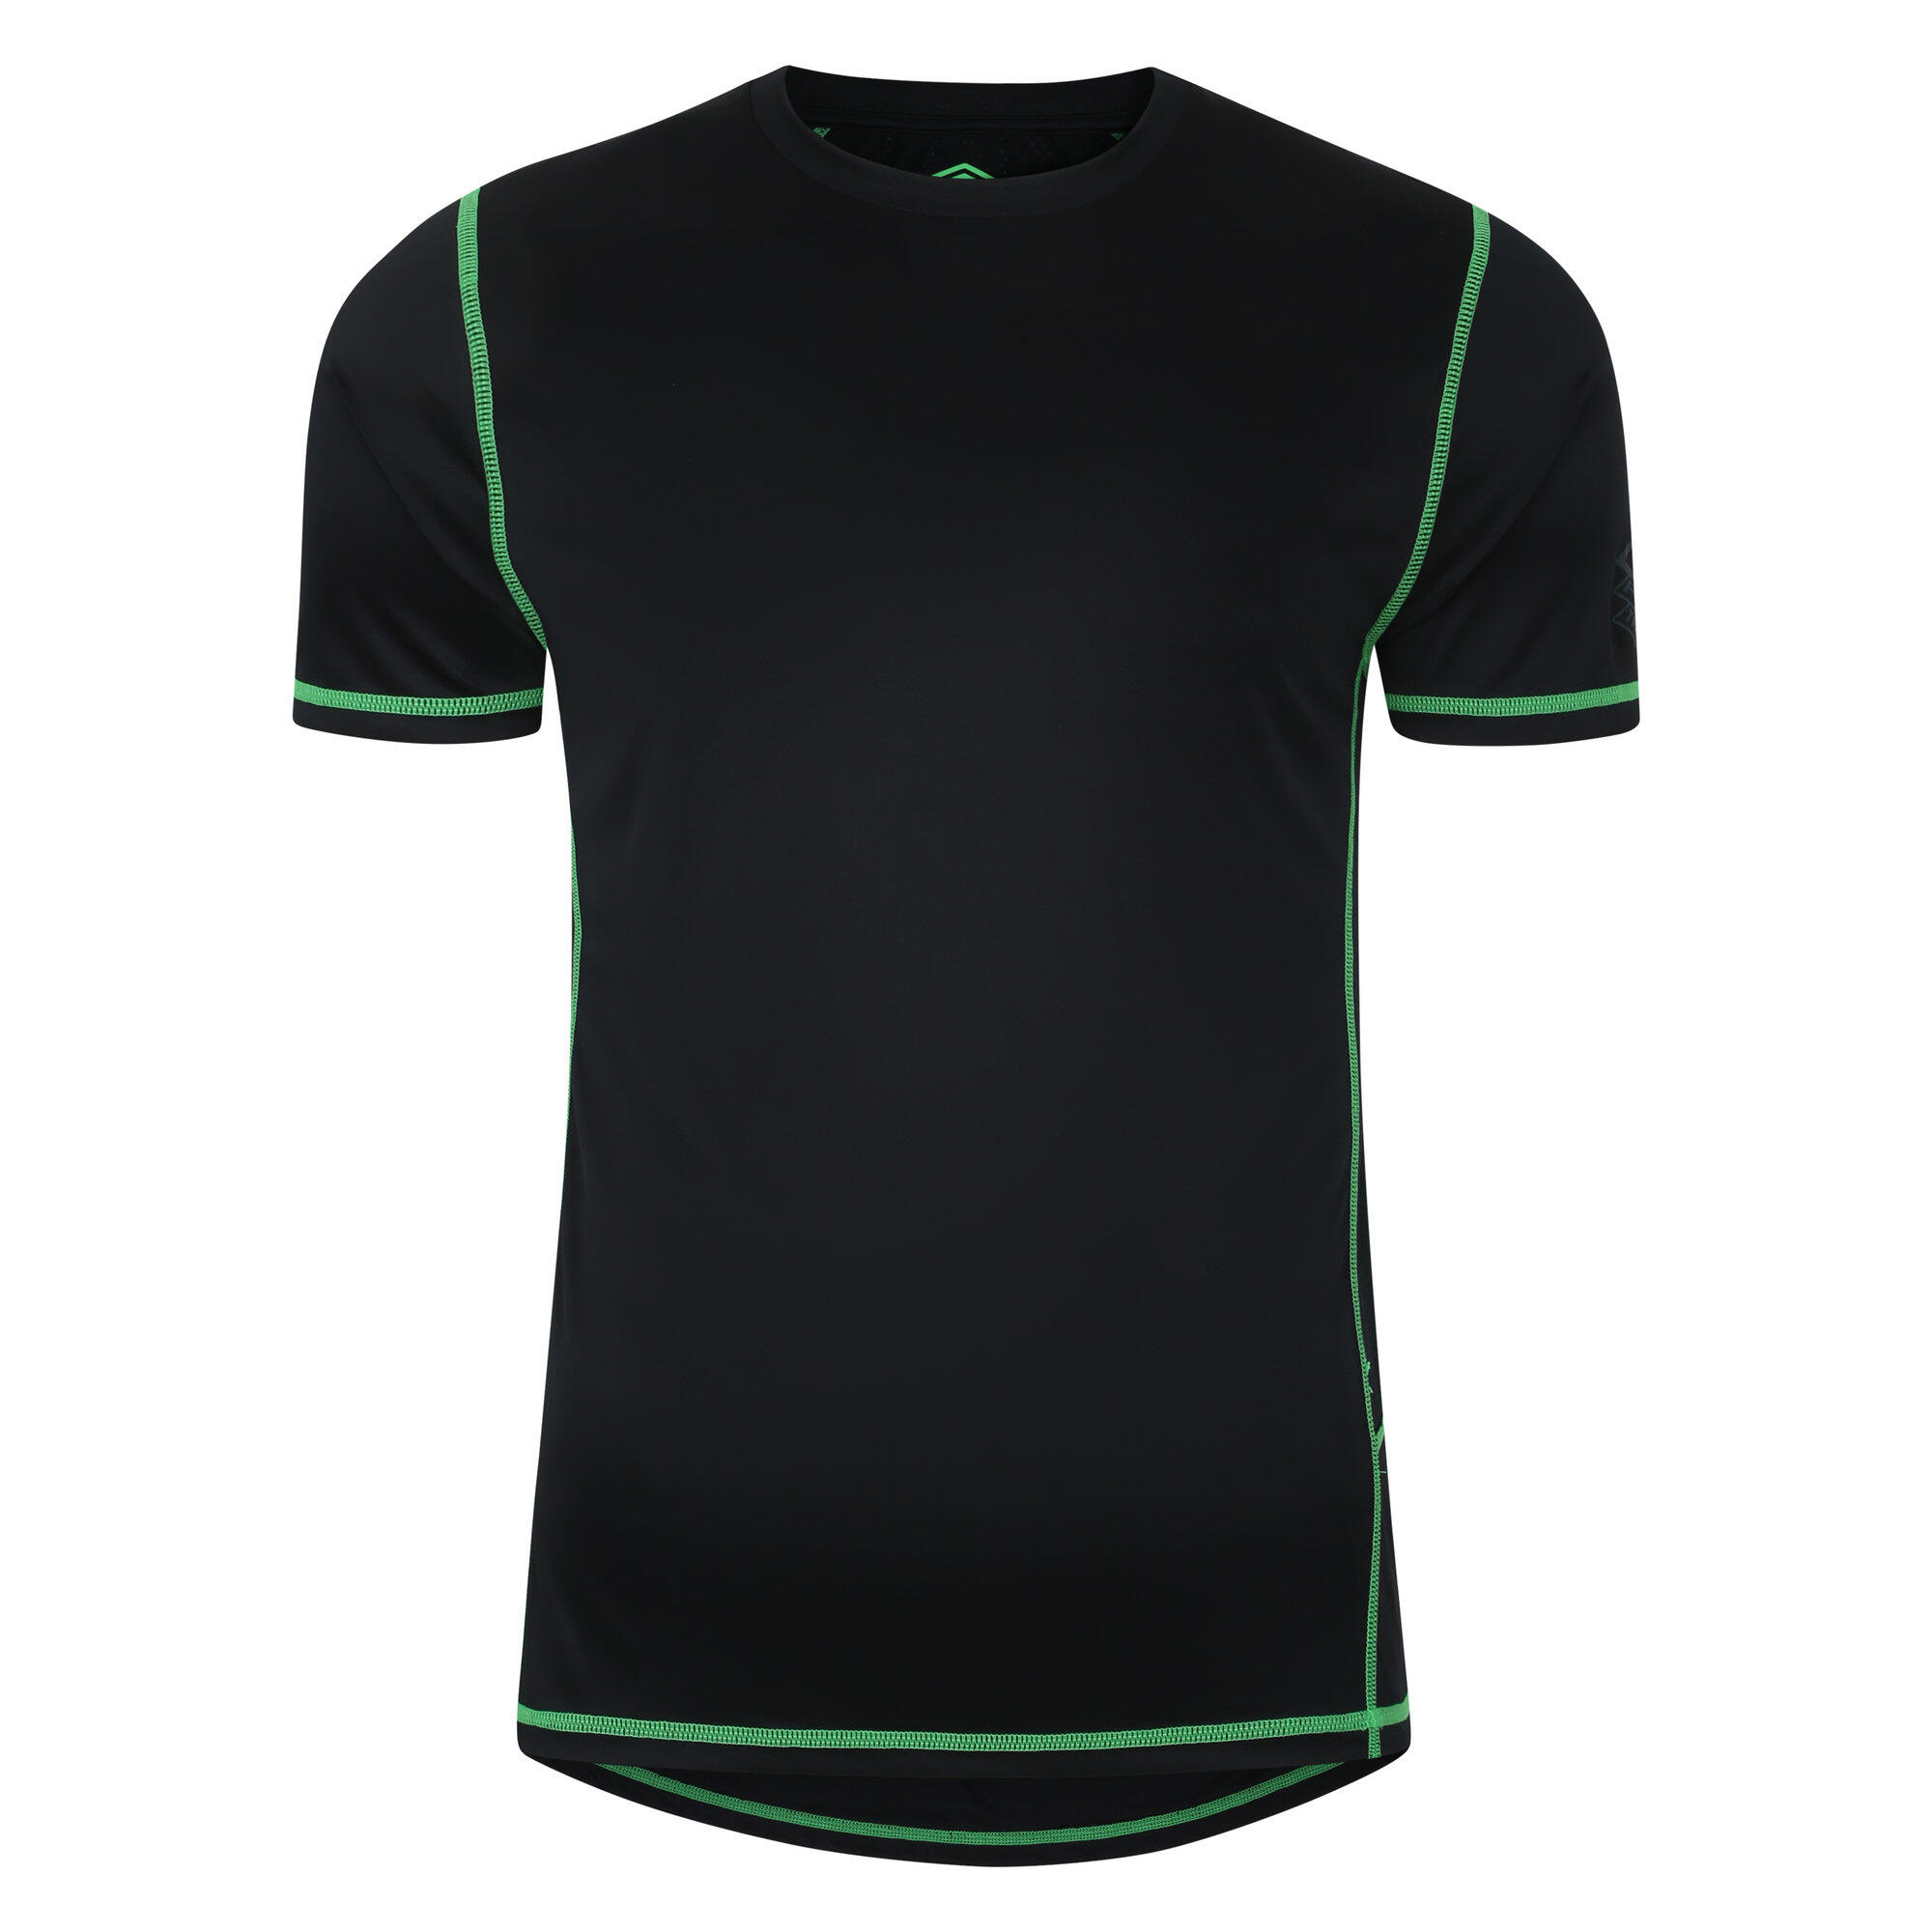 Mens Pro Polyester Training TShirt (Black/Andean Toucan) 1/4